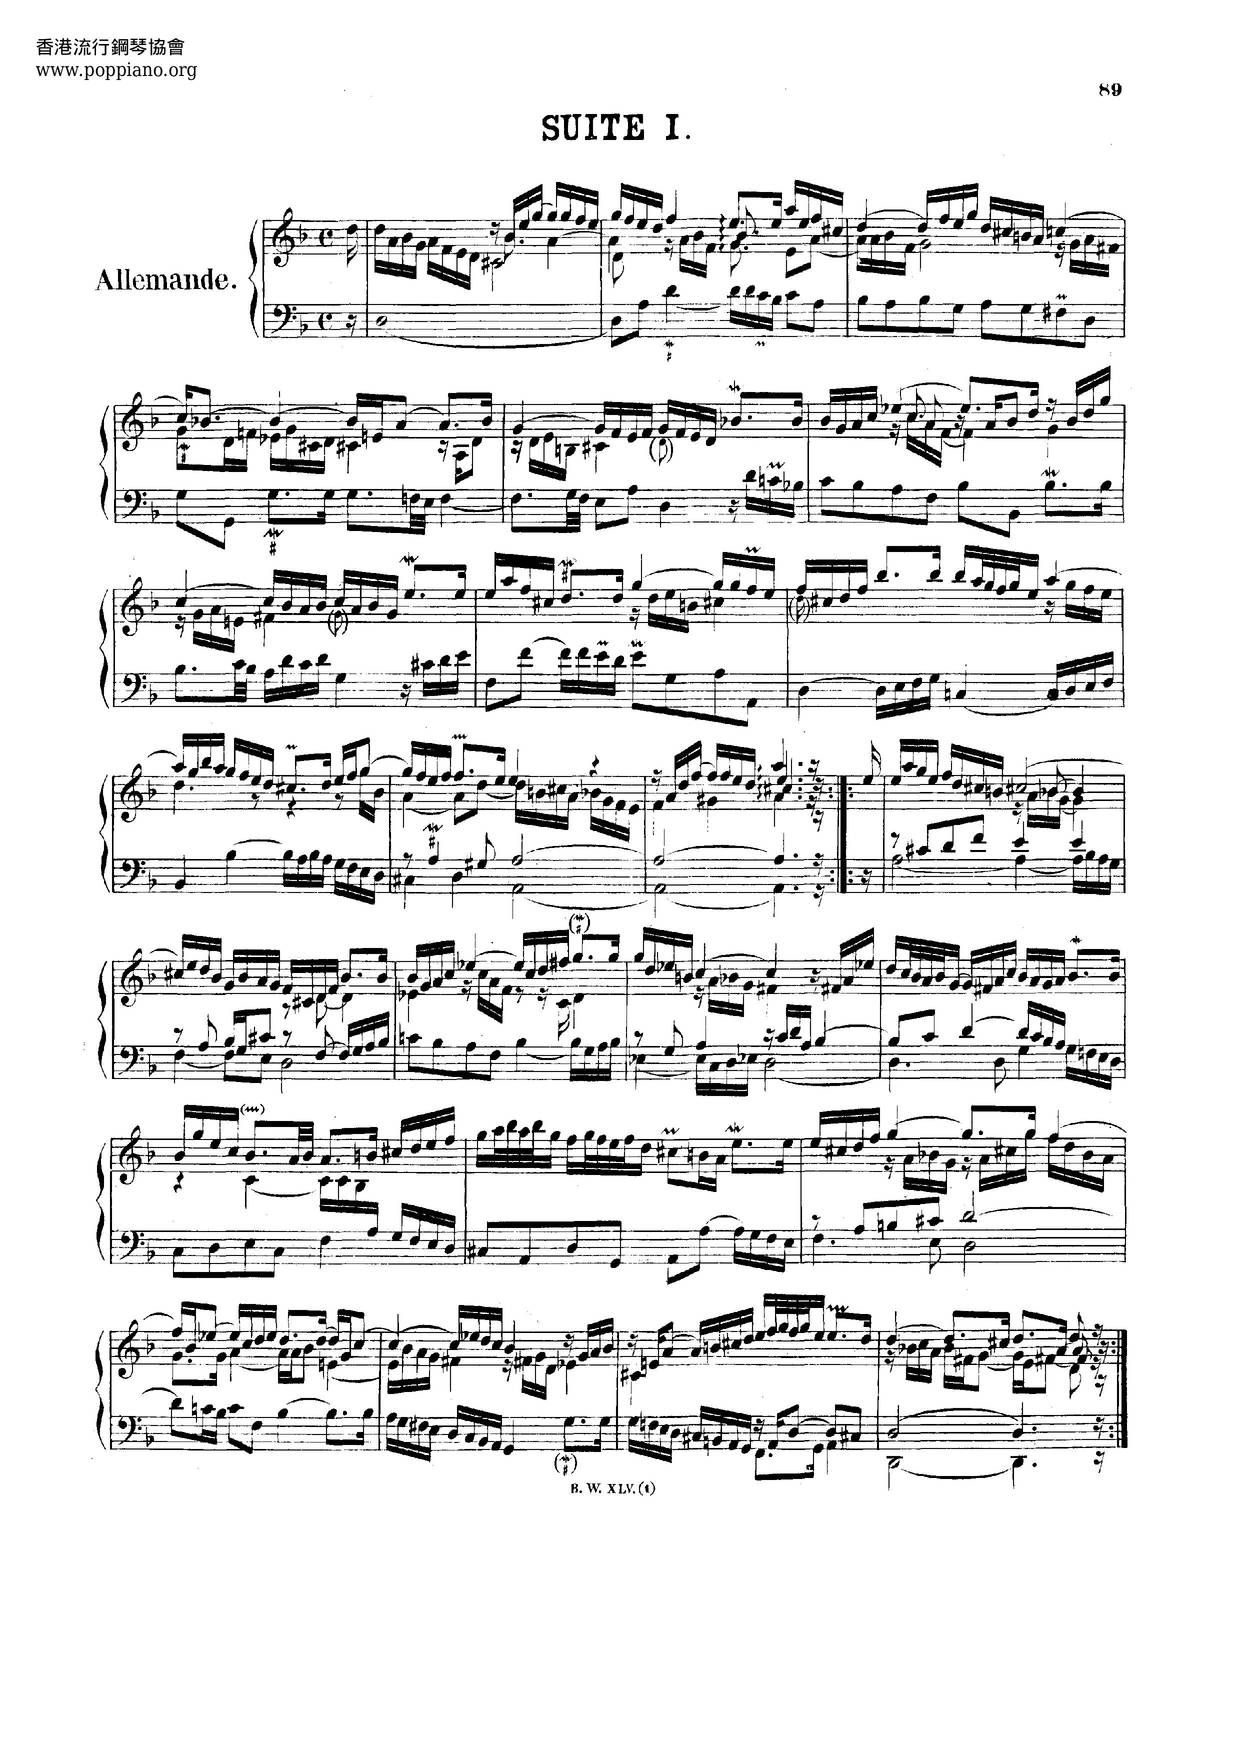 French Suite No. 1 In D Minor, BWV 812琴谱